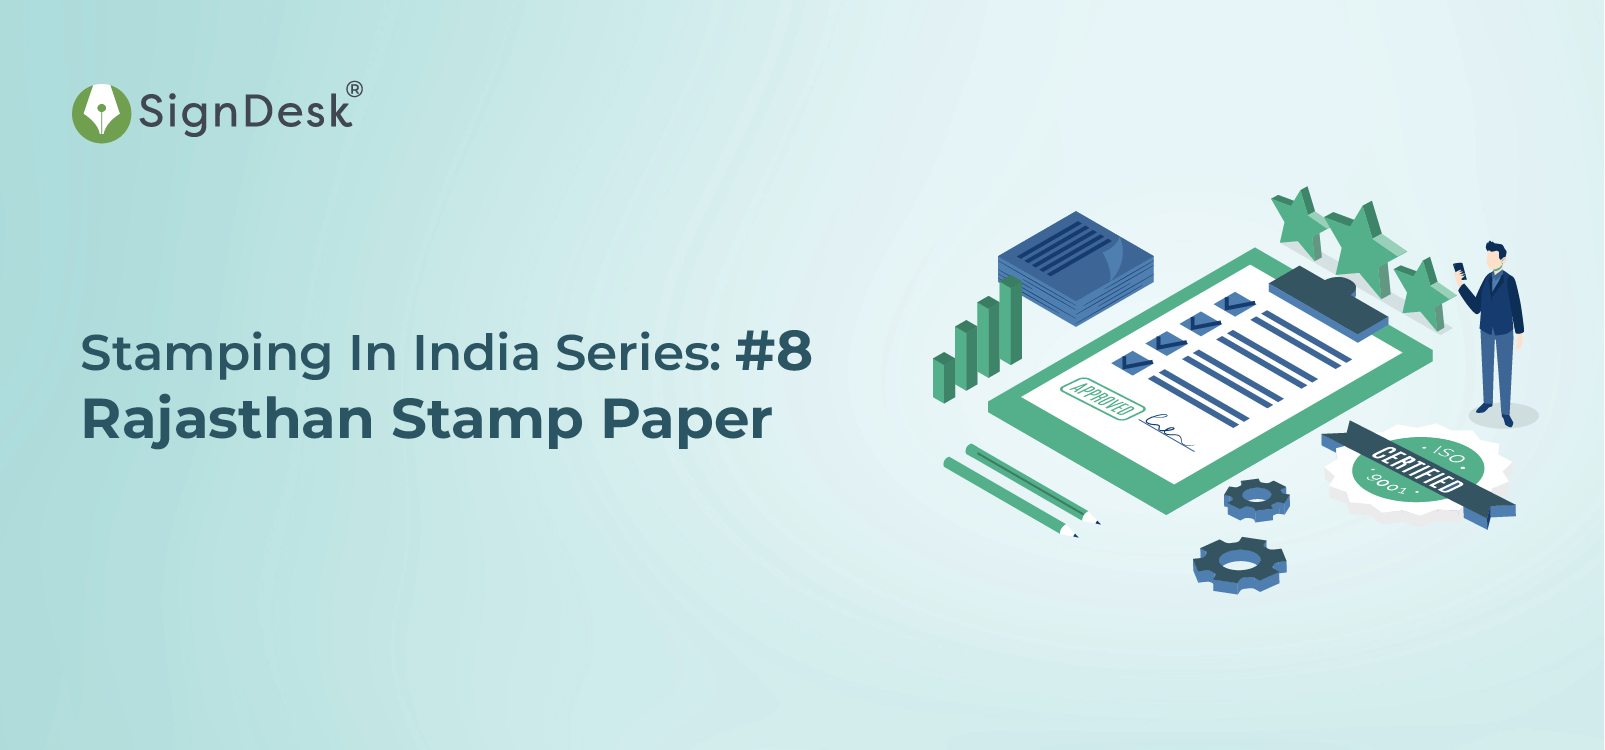 Rajasthan Stamp paper for businesses